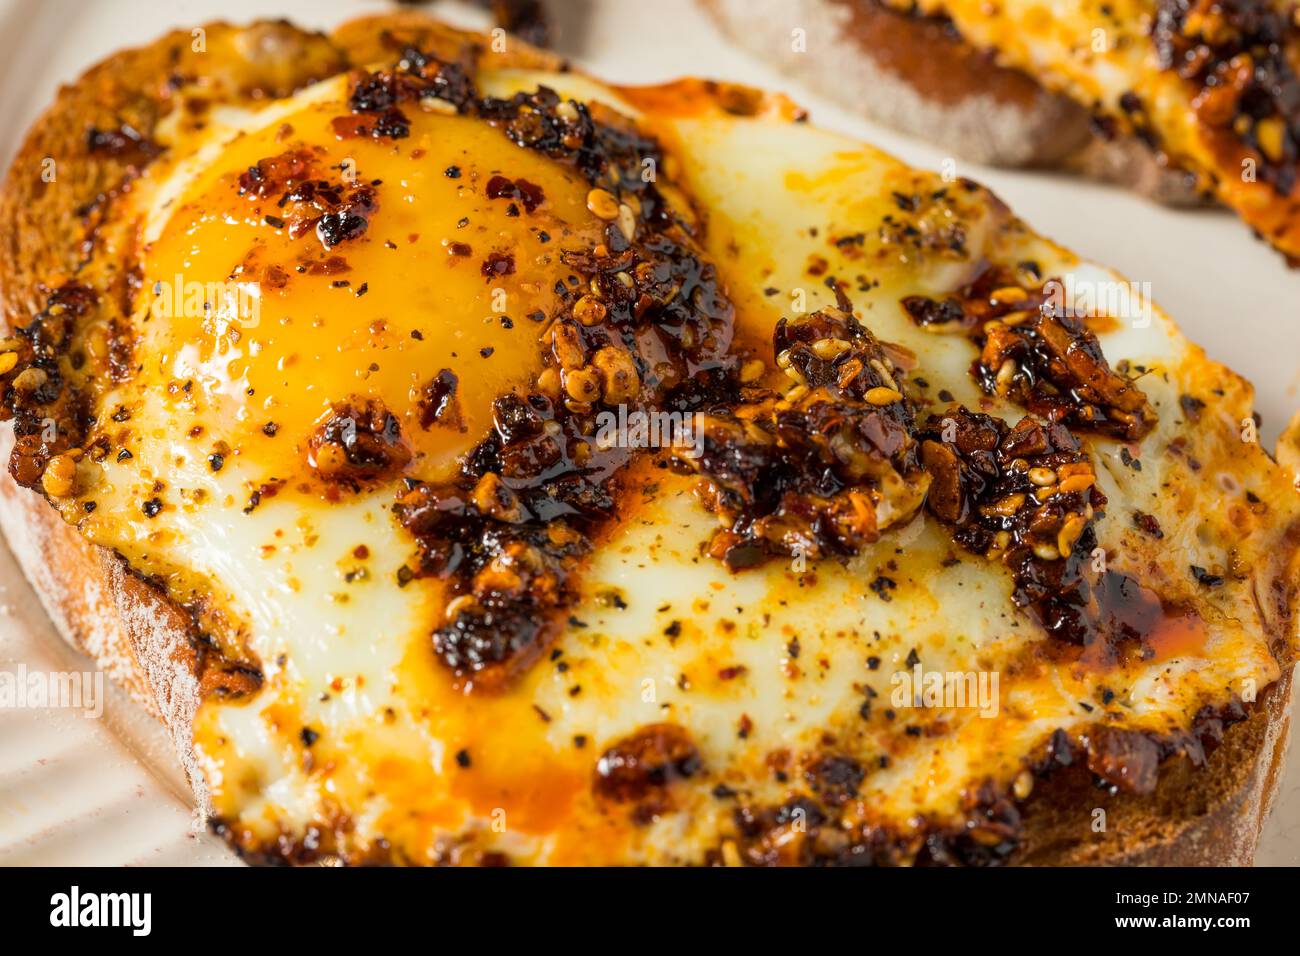 Trendy Homemade Chili Crunch Eggs with Toast Stock Photo